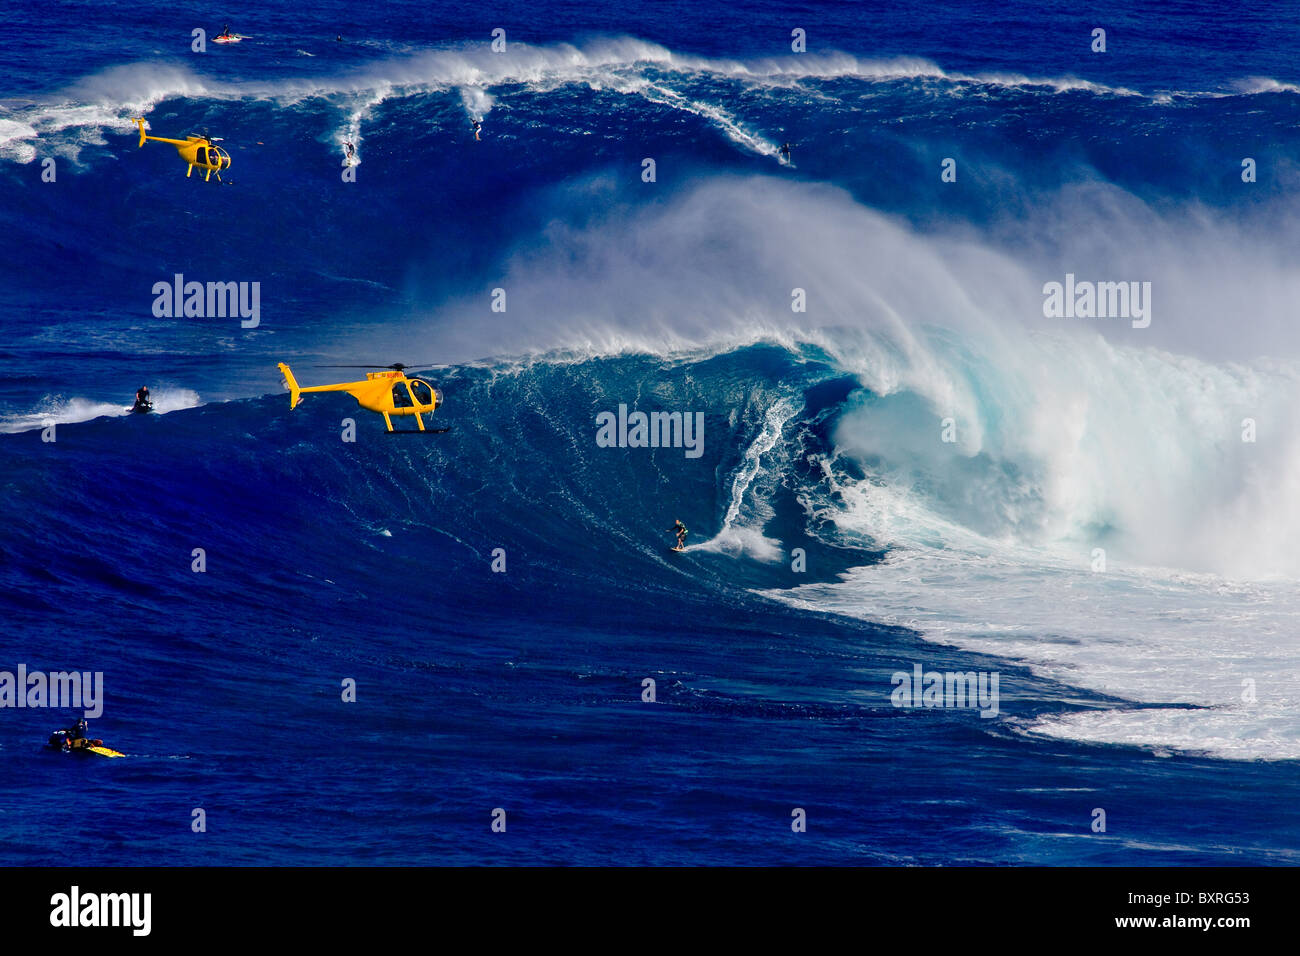 Gigantic Waves in Maui with yellow helicopters at Peahi,  Also known as 'Jaws'.  World famous tow-in surf spot in Hawaii Stock Photo